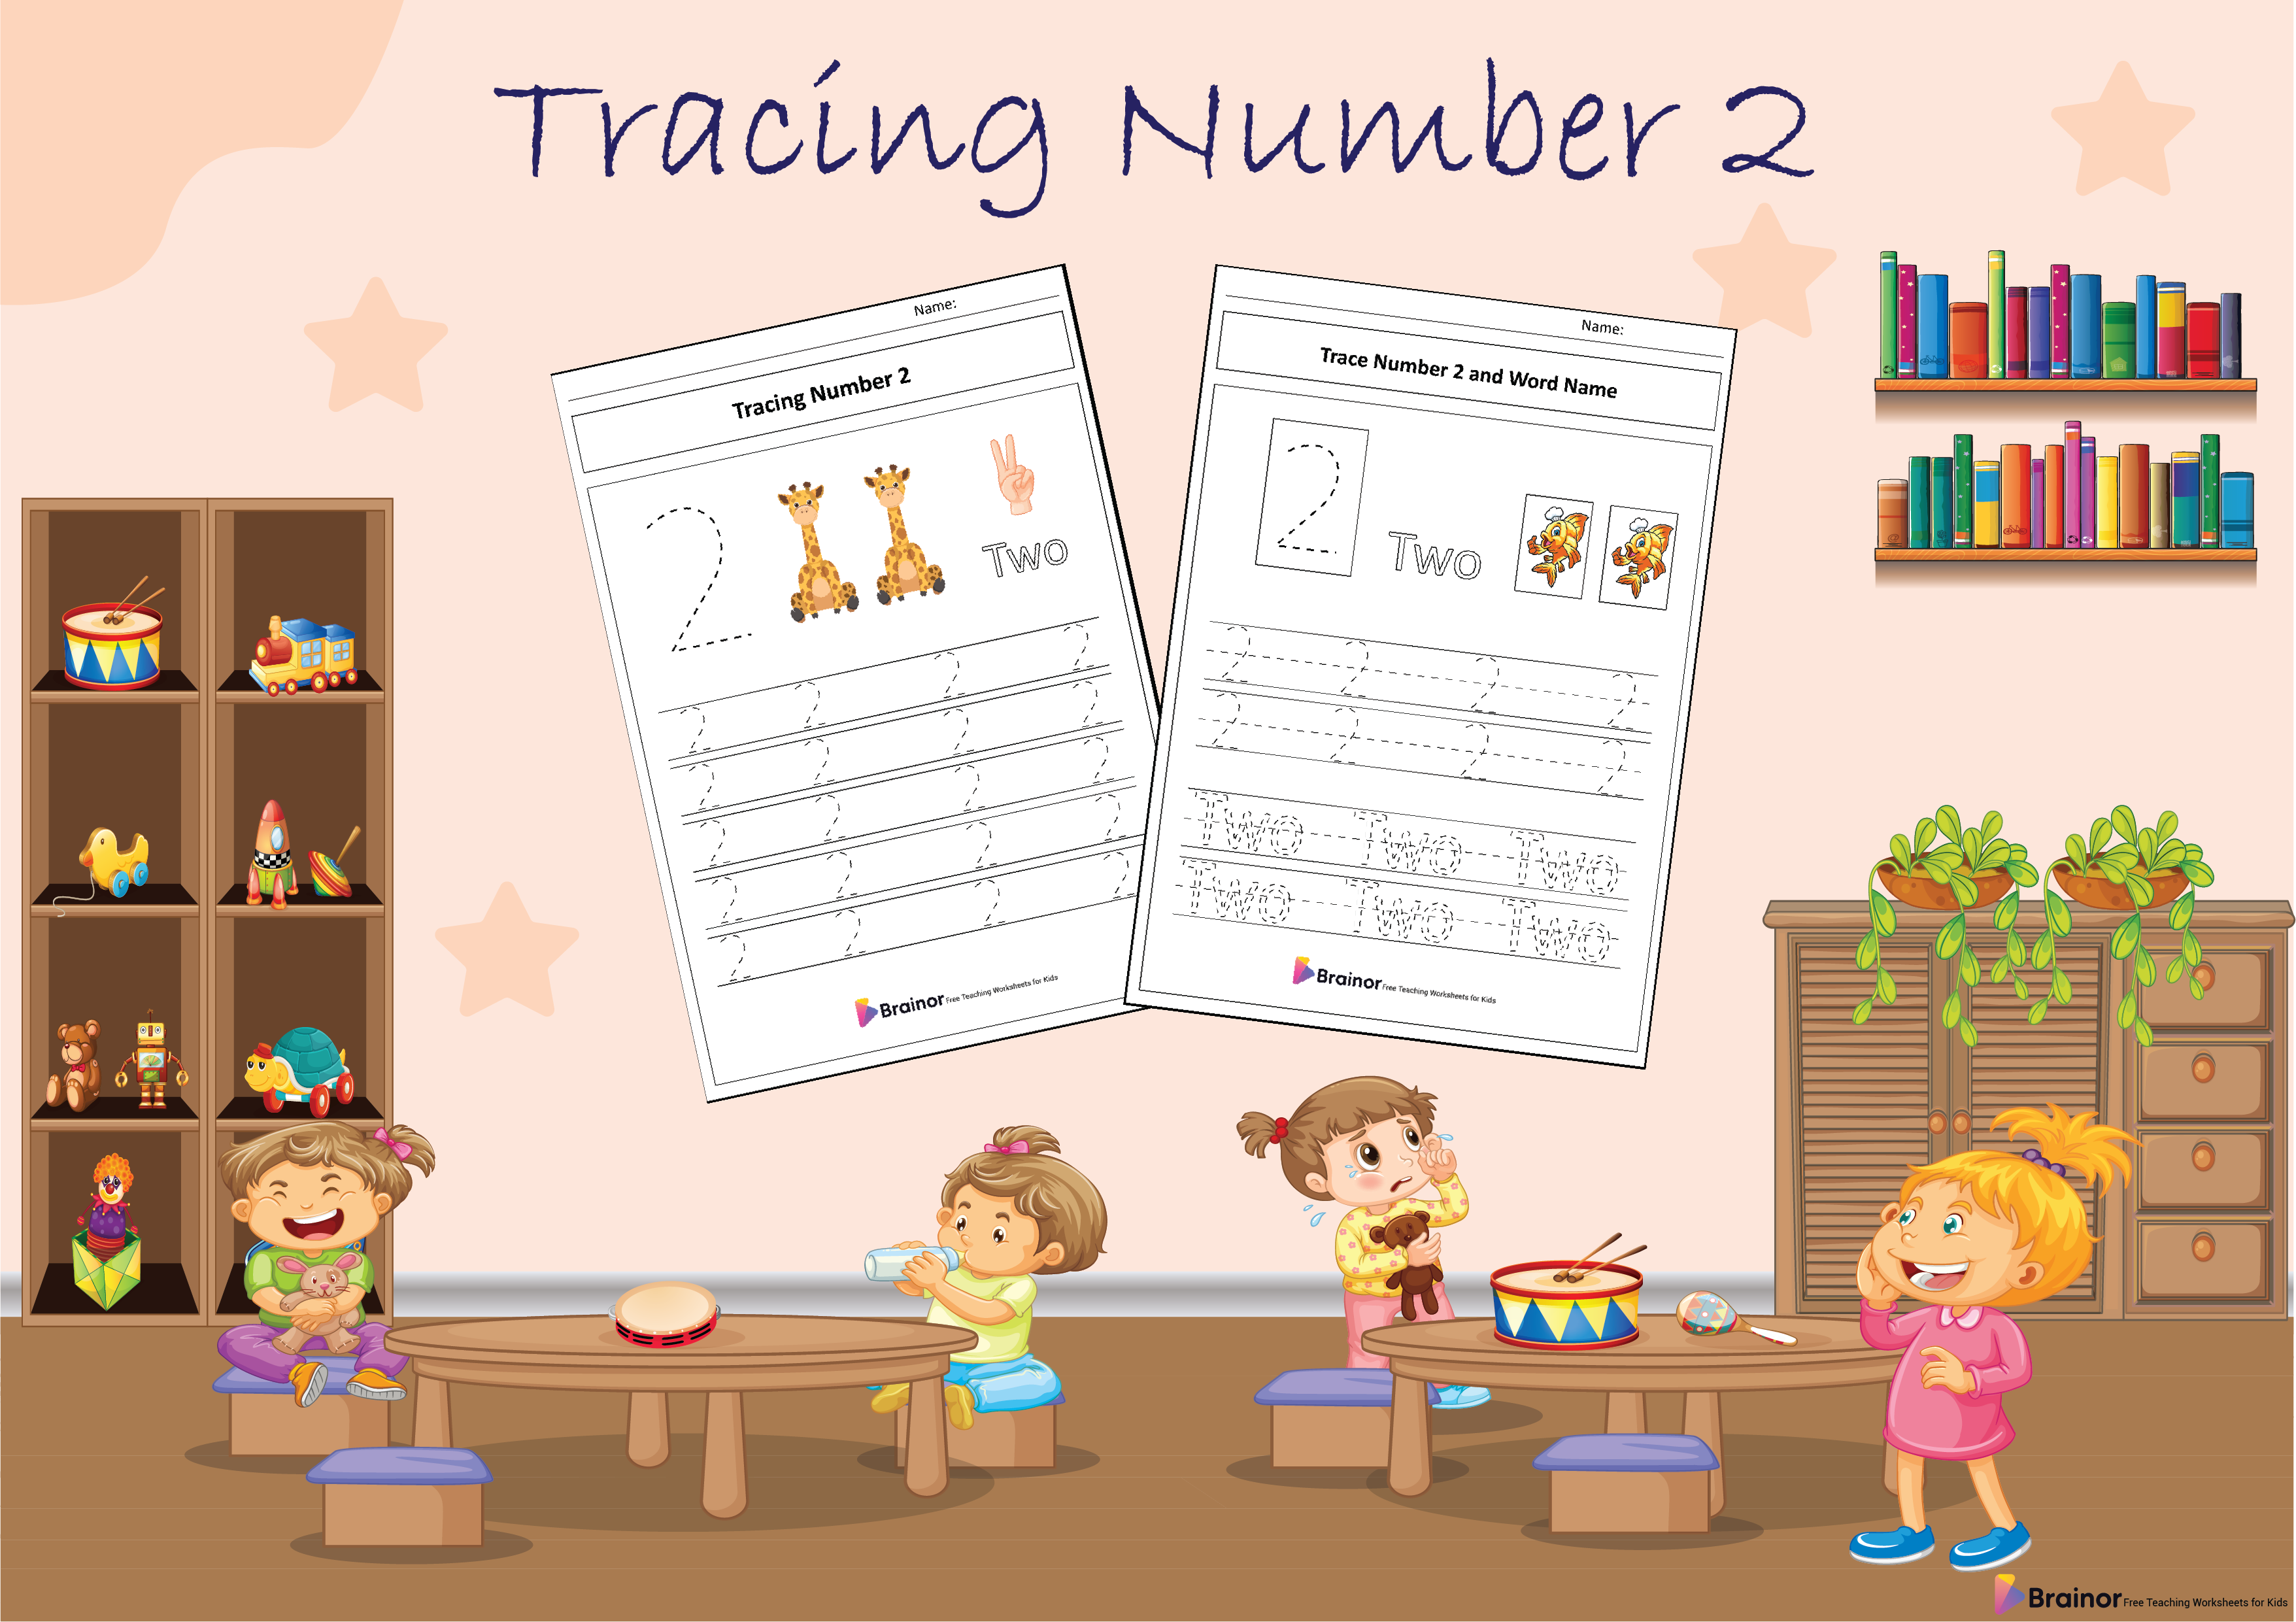 tracing number 2 - overview